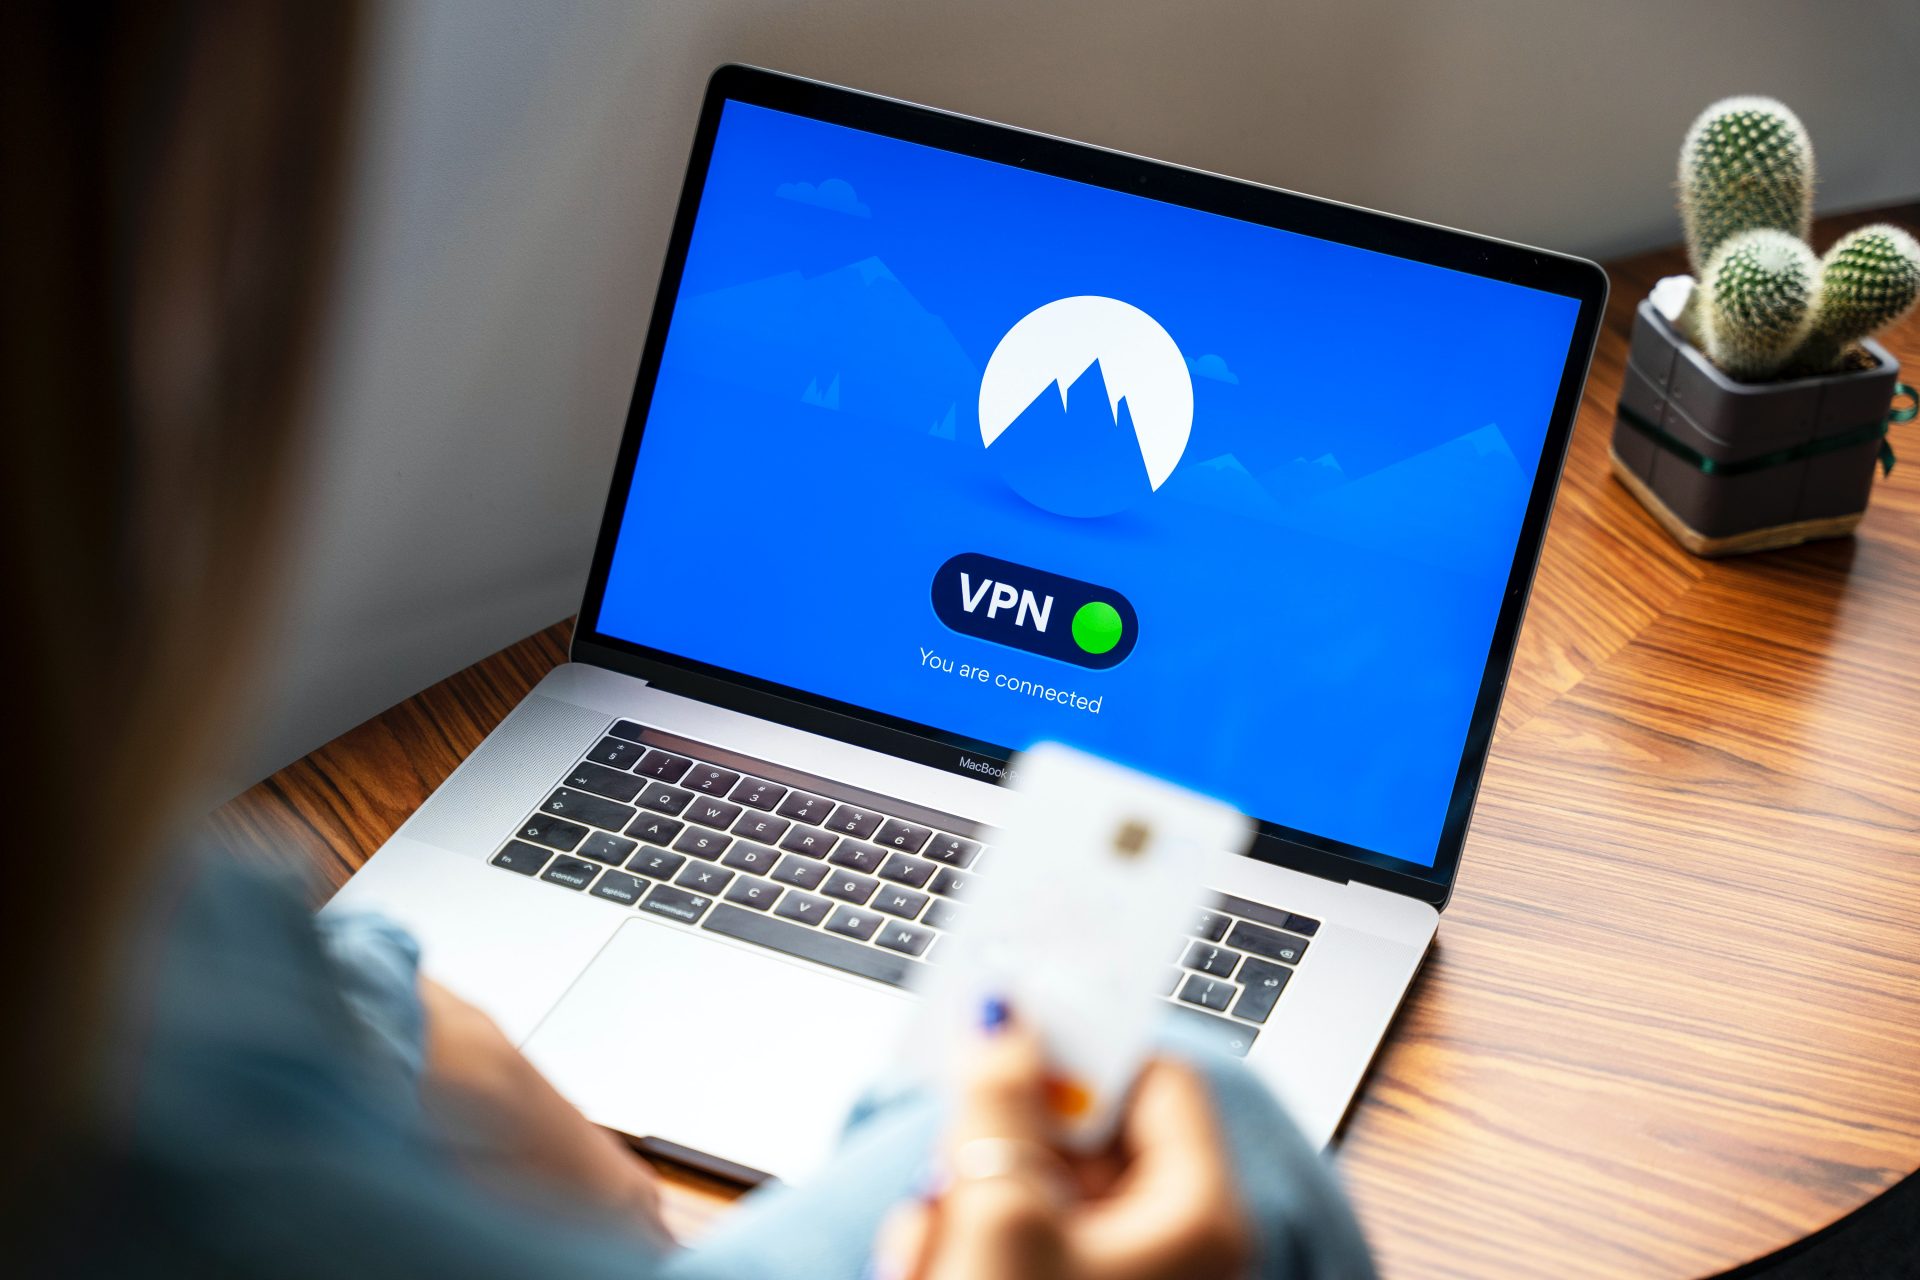 Does VPN Give Free Data?